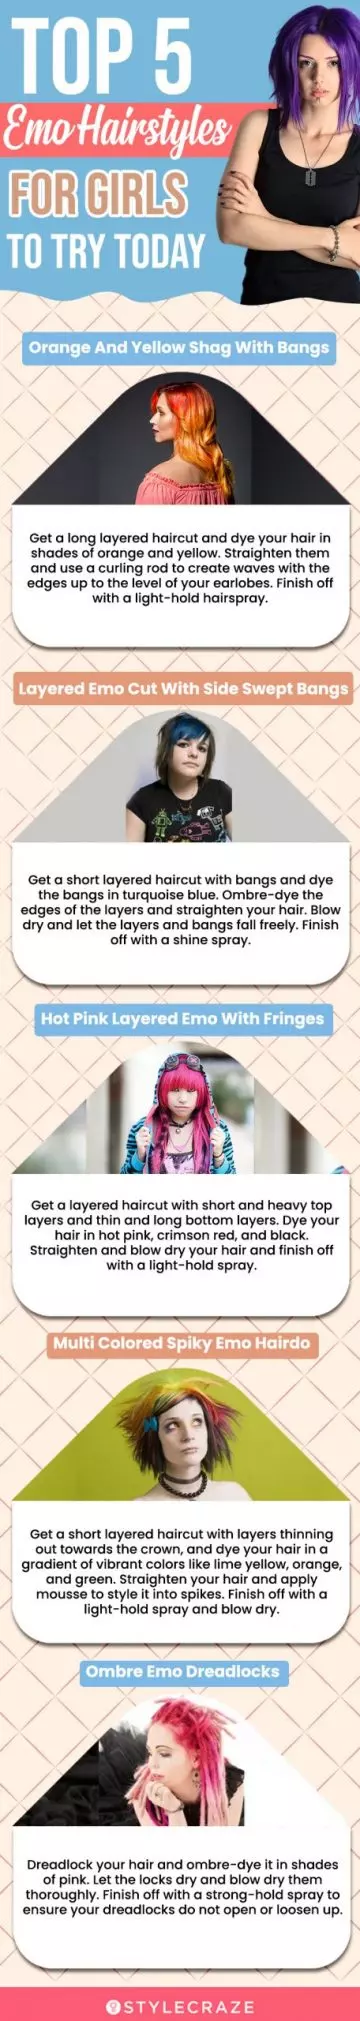 top 5 emo hairstyles for girls to try today (infographic)